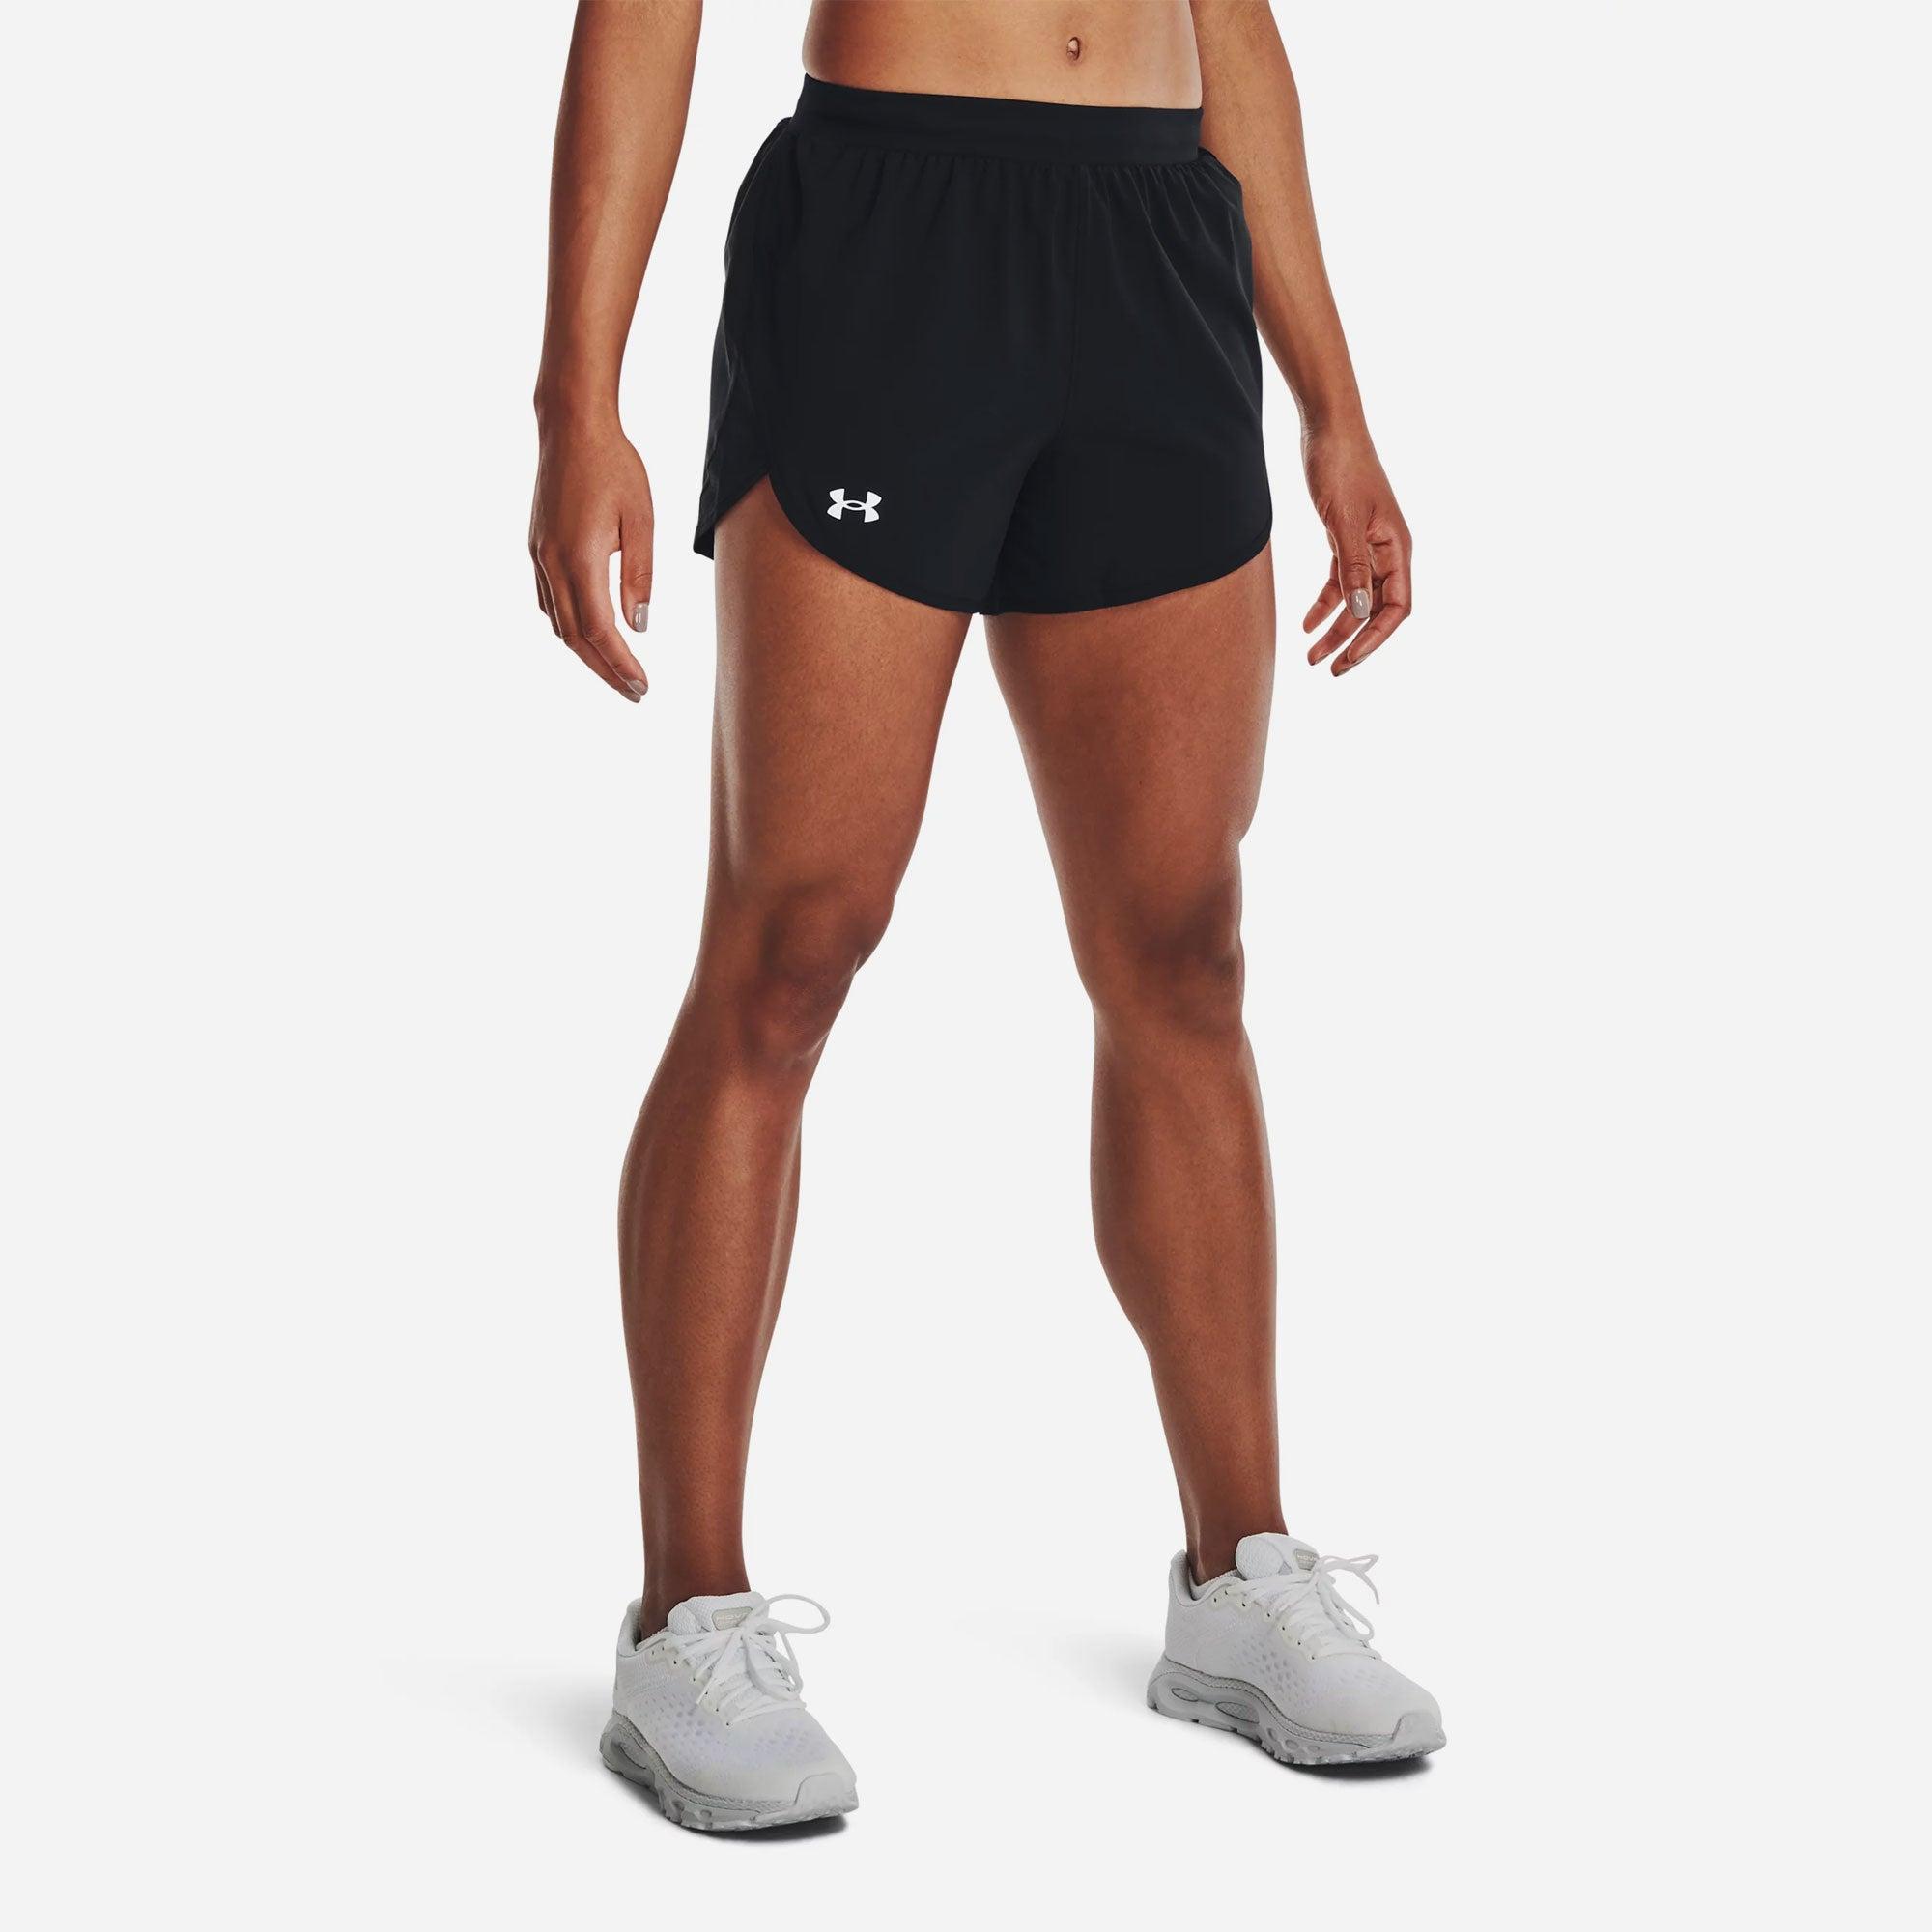 Quần ngắn thể thao nữ Under Armour Fly By Elite - 1369766-001